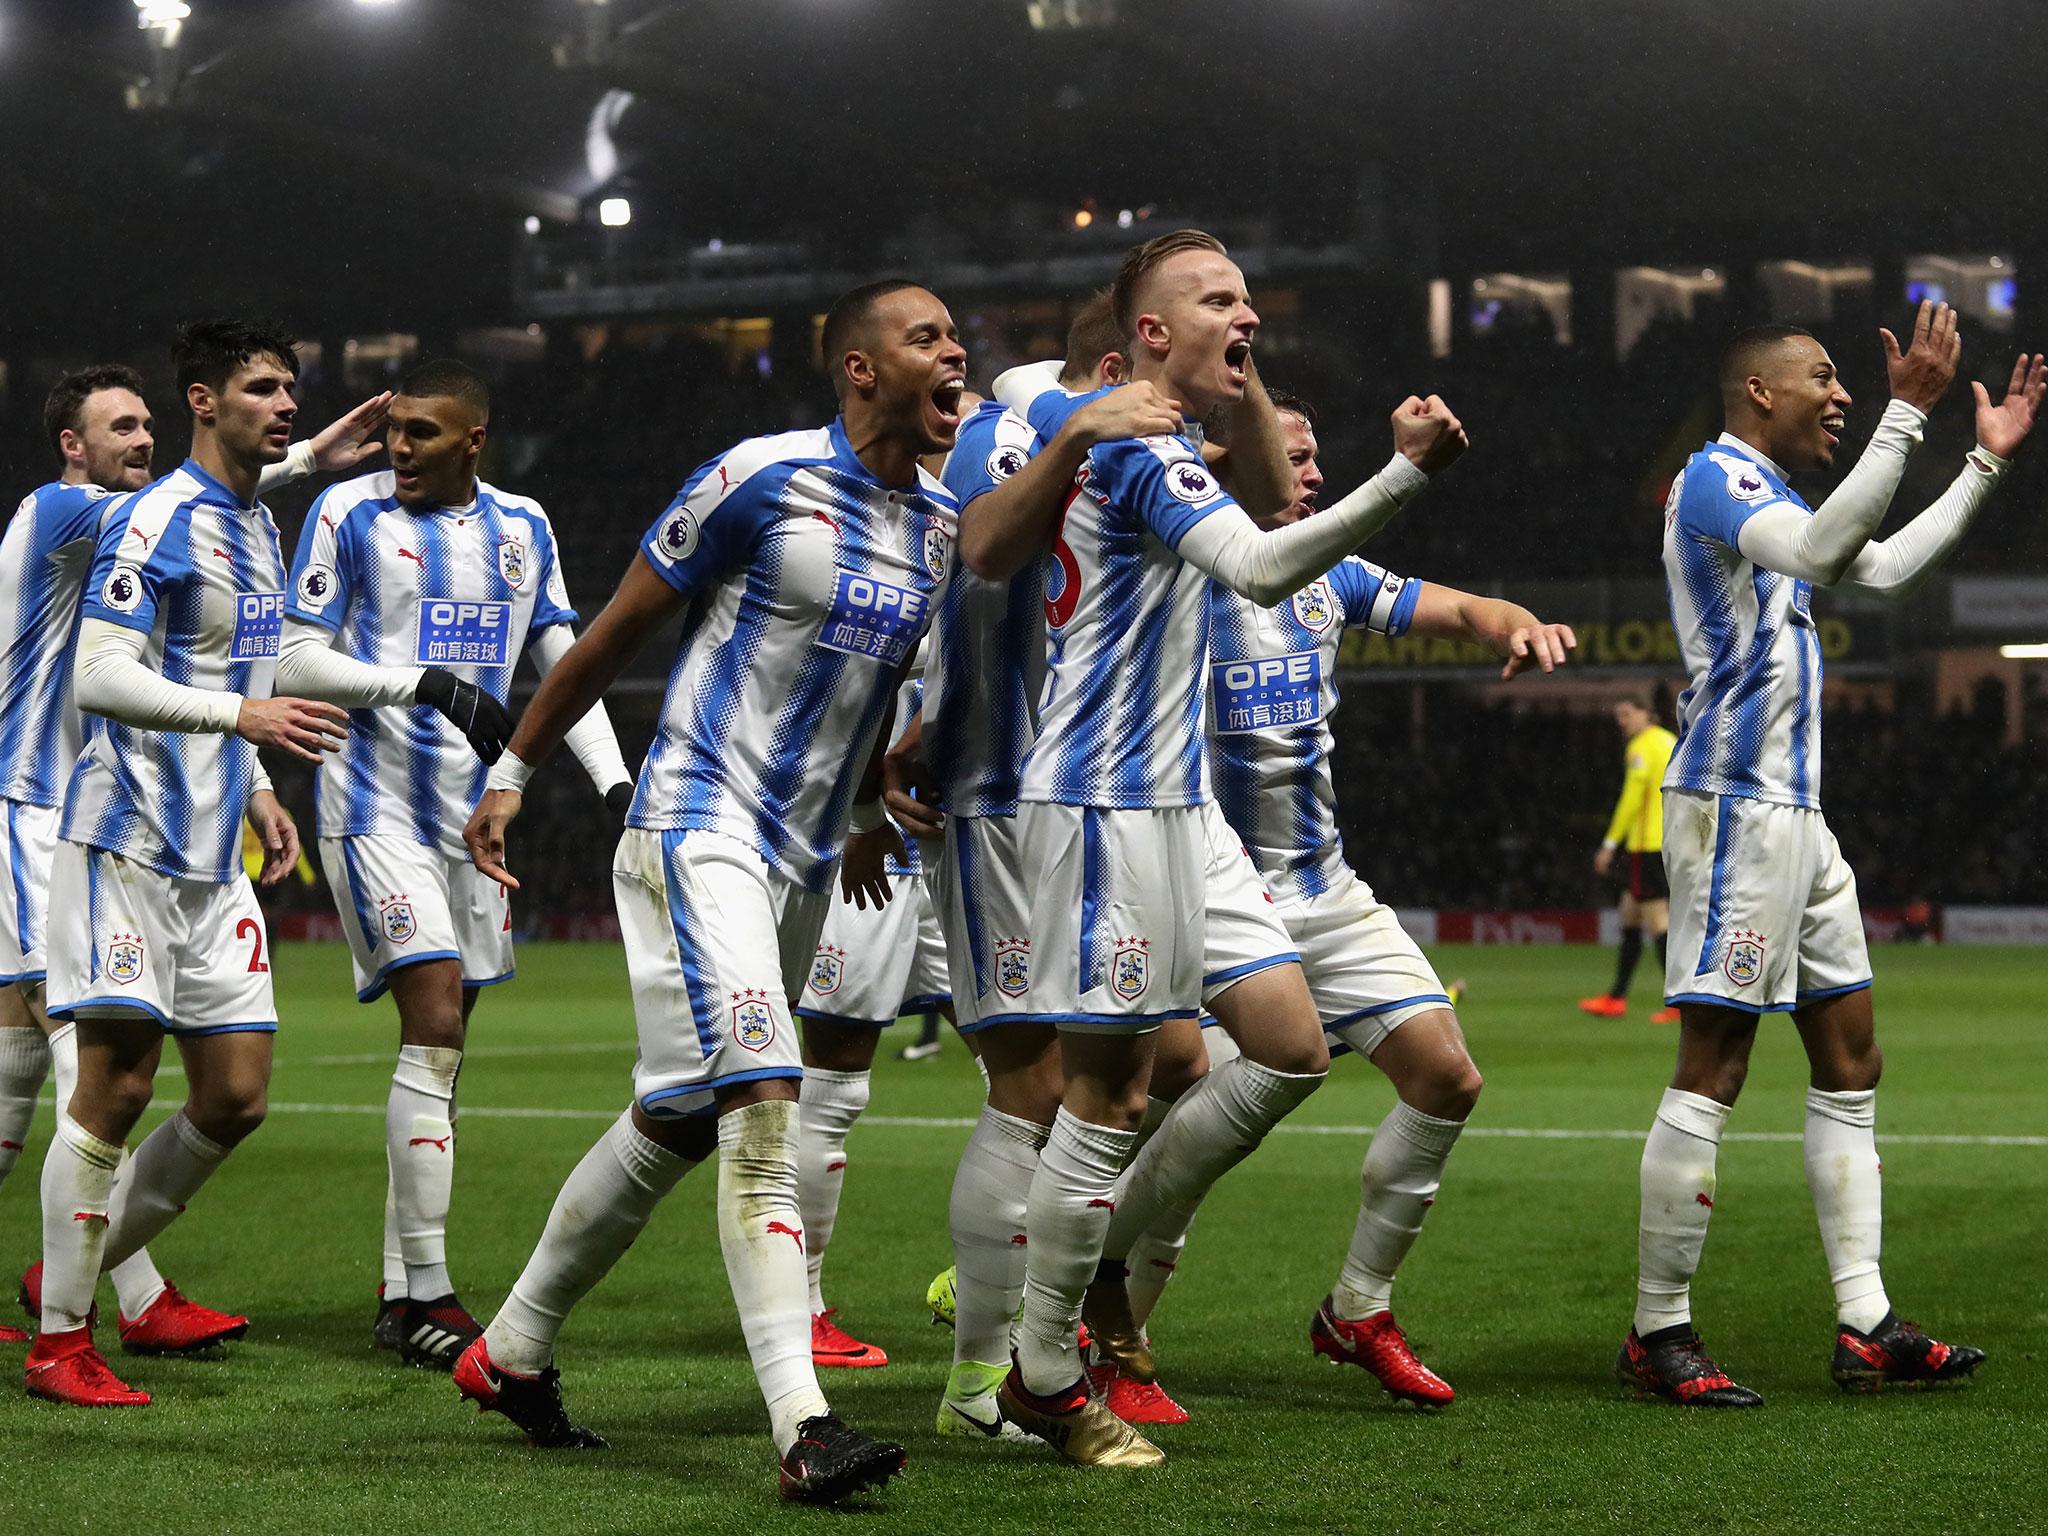 This was Huddersfield's second win from three games